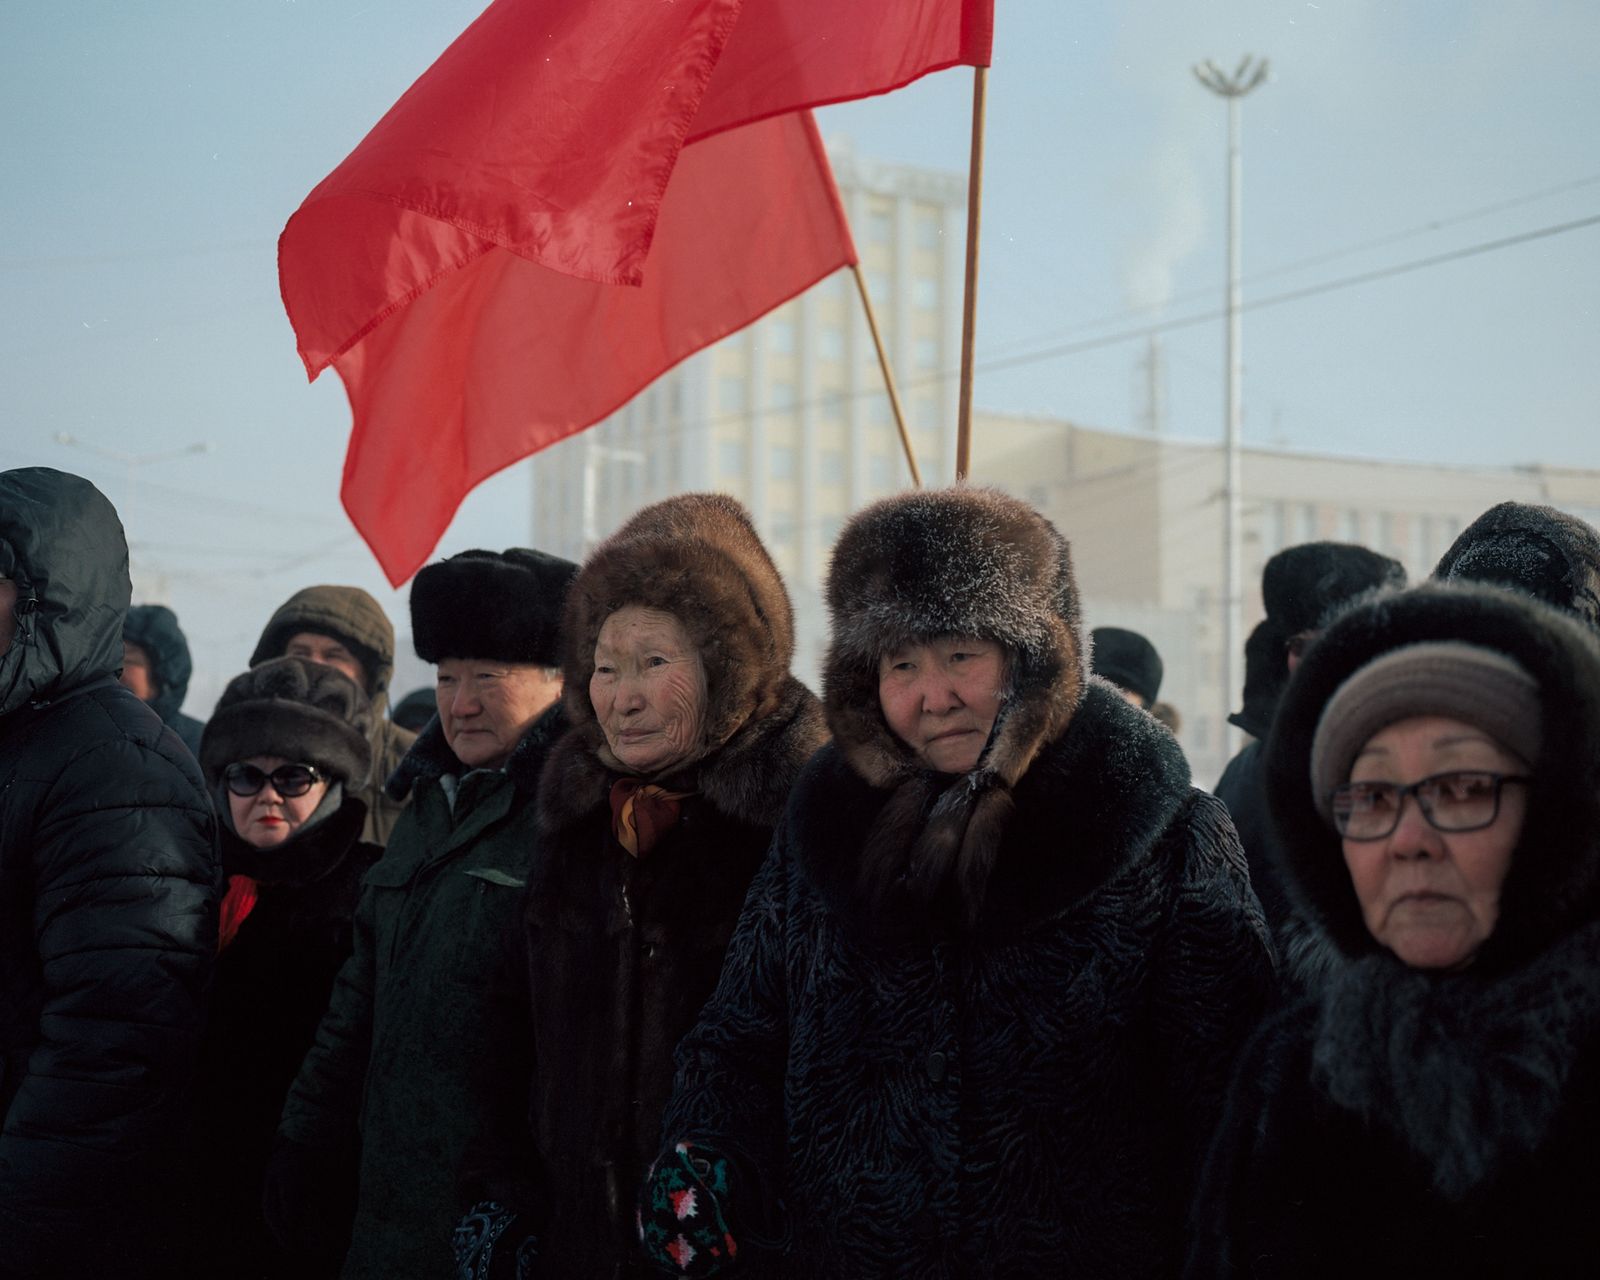 © alexis pazoumian - Image from the YAKUTSK photography project